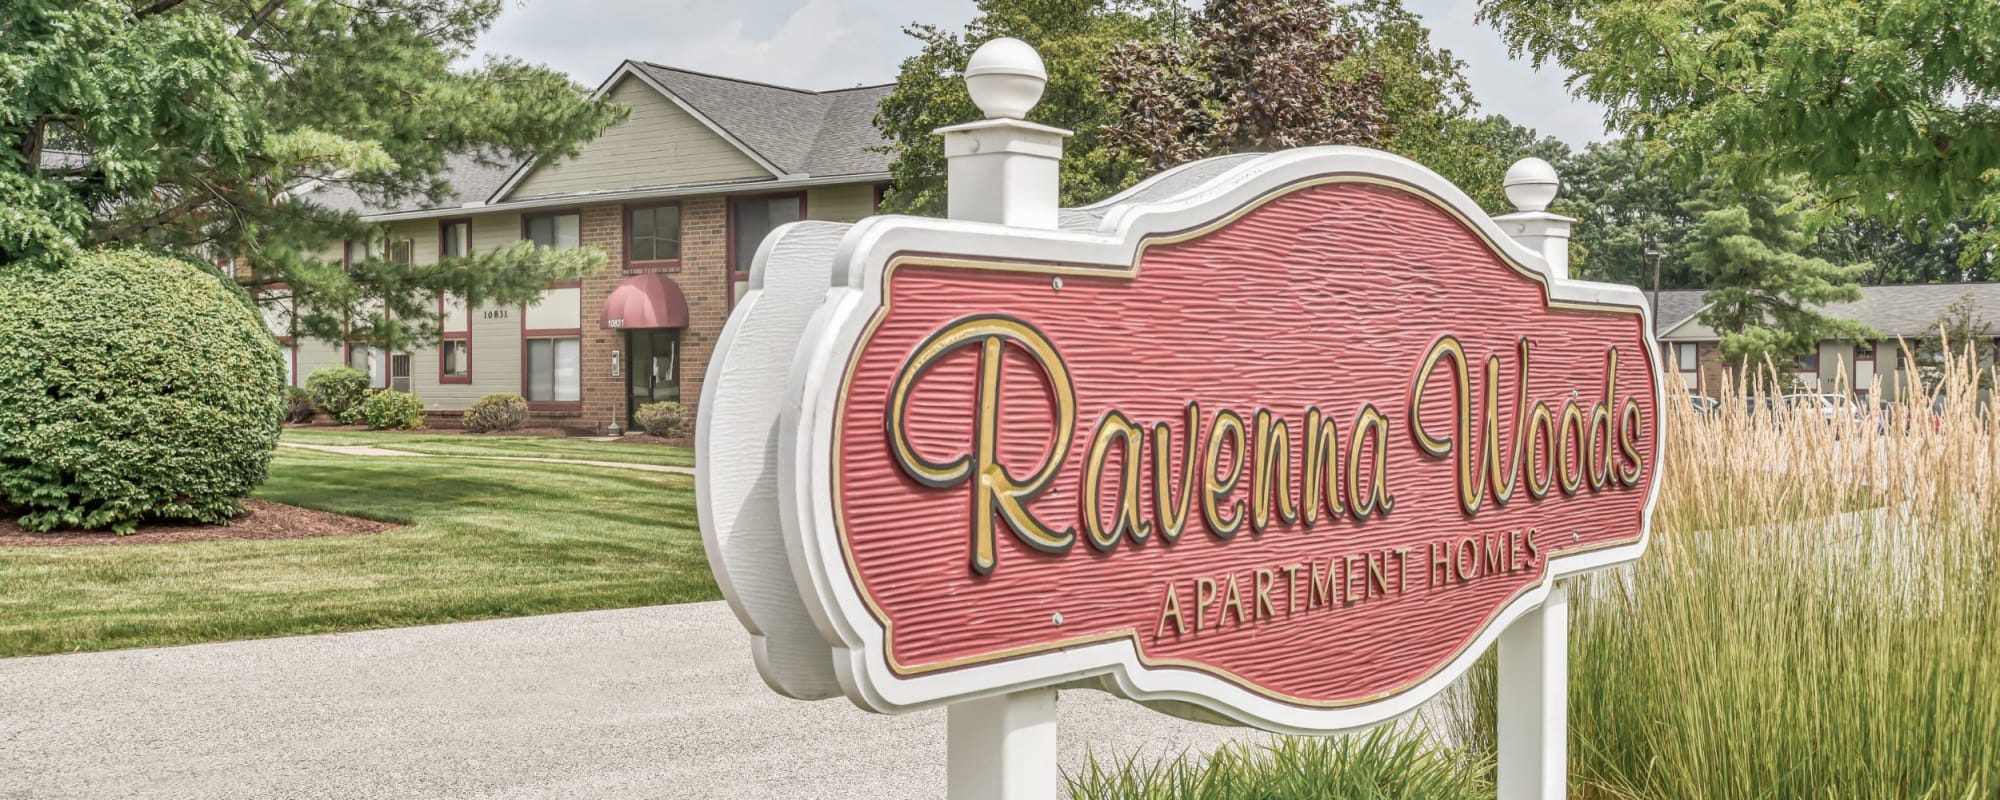 Apartments in Twinsburg, Ohio at Ravenna Woods